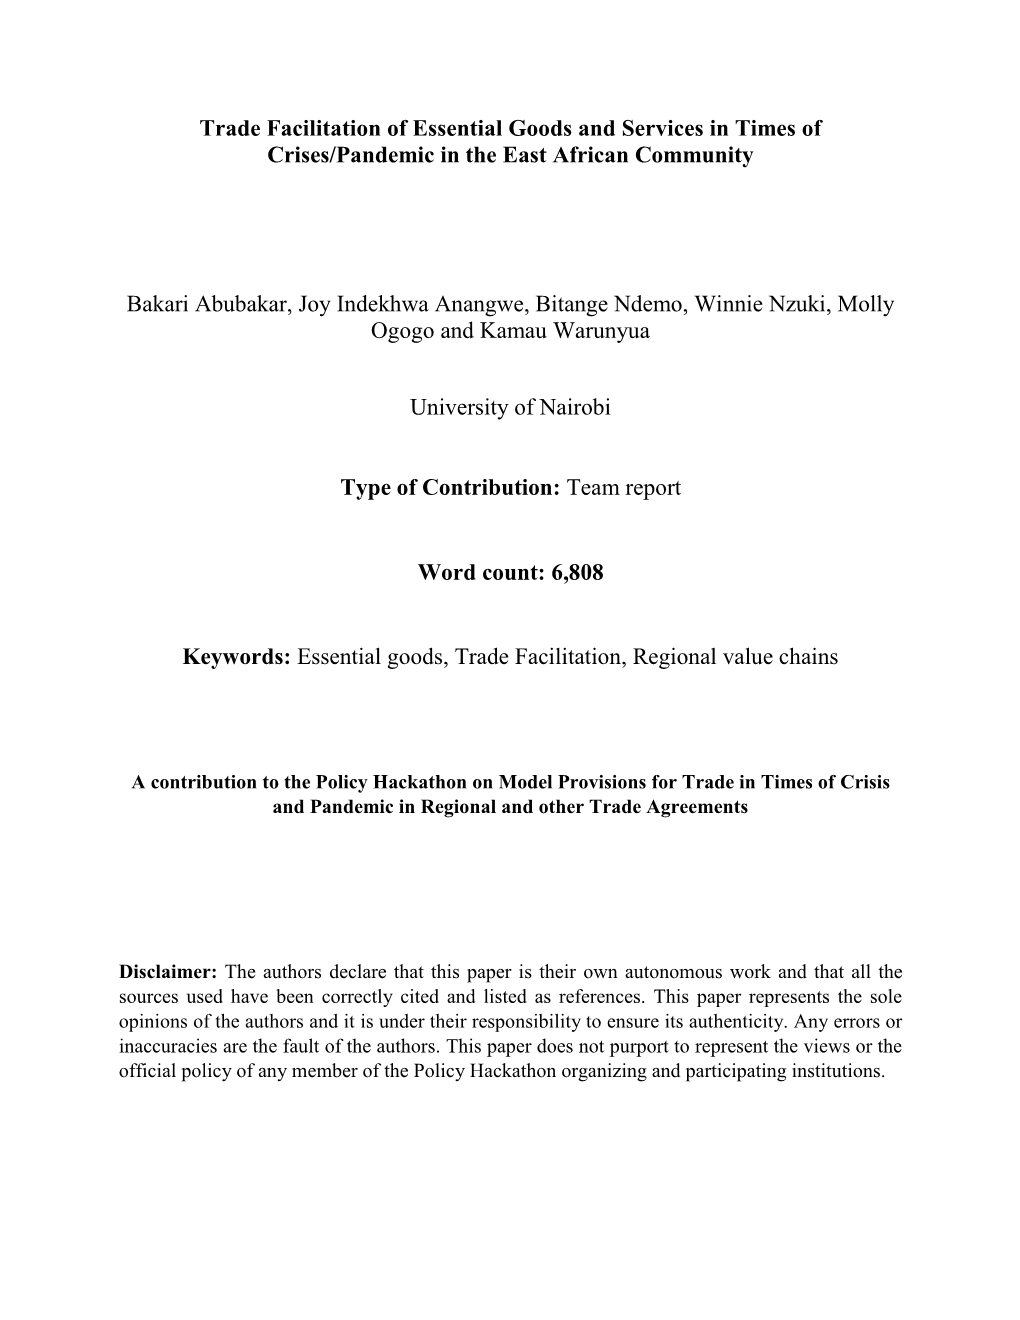 Trade Facilitation of Essential Goods and Services in Times of Crises/Pandemic in the East African Community Bakari Abubakar, Jo